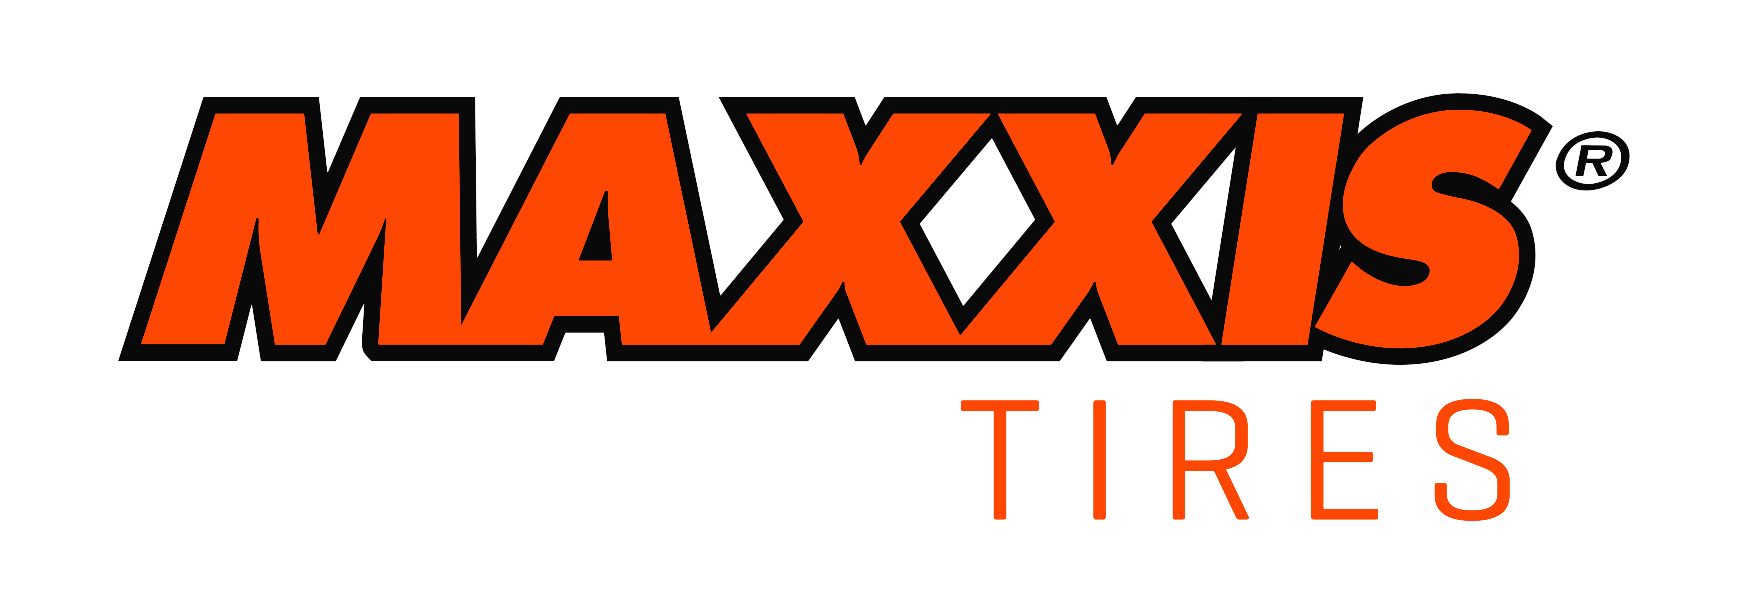 Maxxis Logo - maxxis-tires-word-outlined - Robo's Group